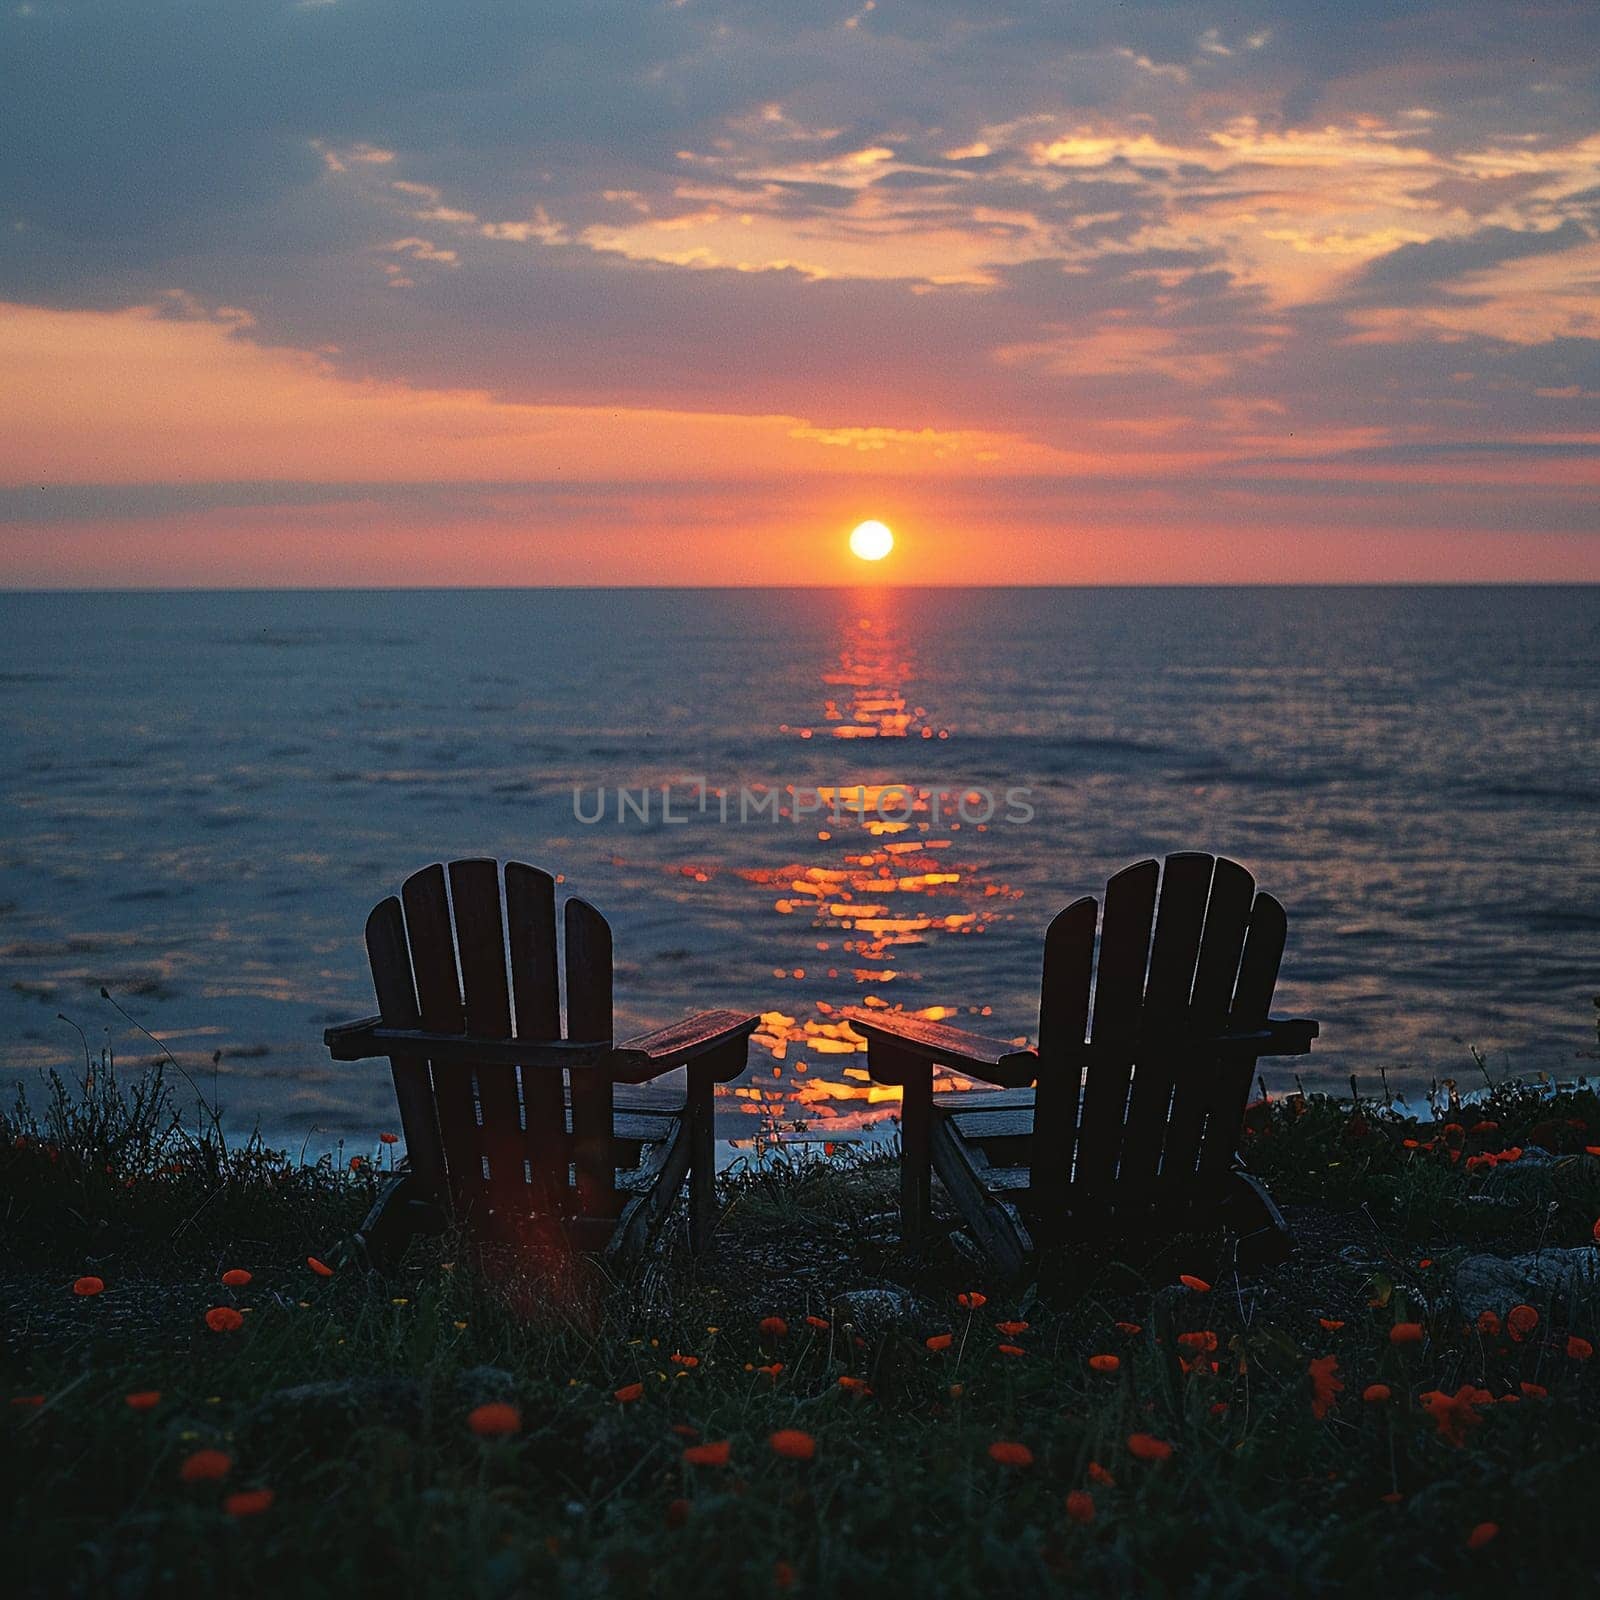 Pair of empty chairs facing sunset, subtle celebration of companionship on White Day.